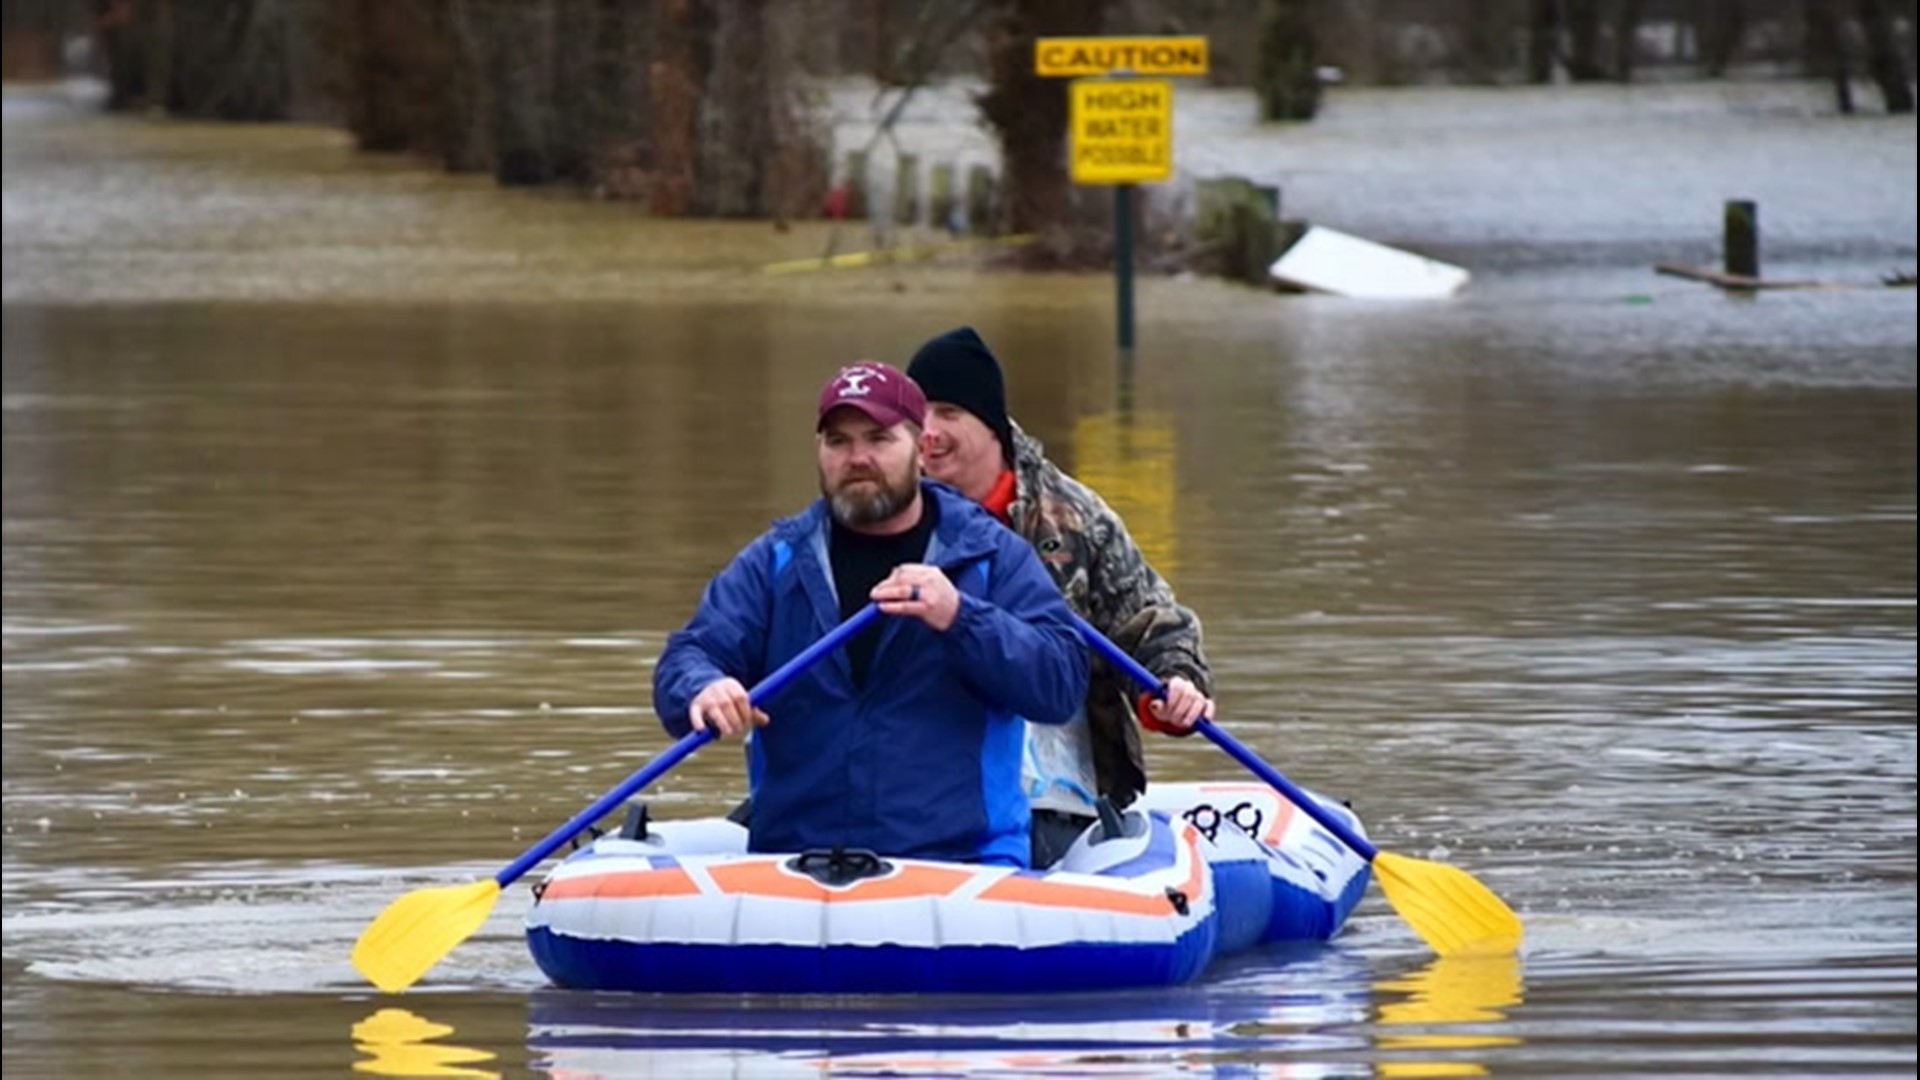 The Dishmans have been living in London, Kentucky, for 16 years, but on March 1, they grabbed as much as they could and fled their trailer as nearly half a foot of water poured inside.